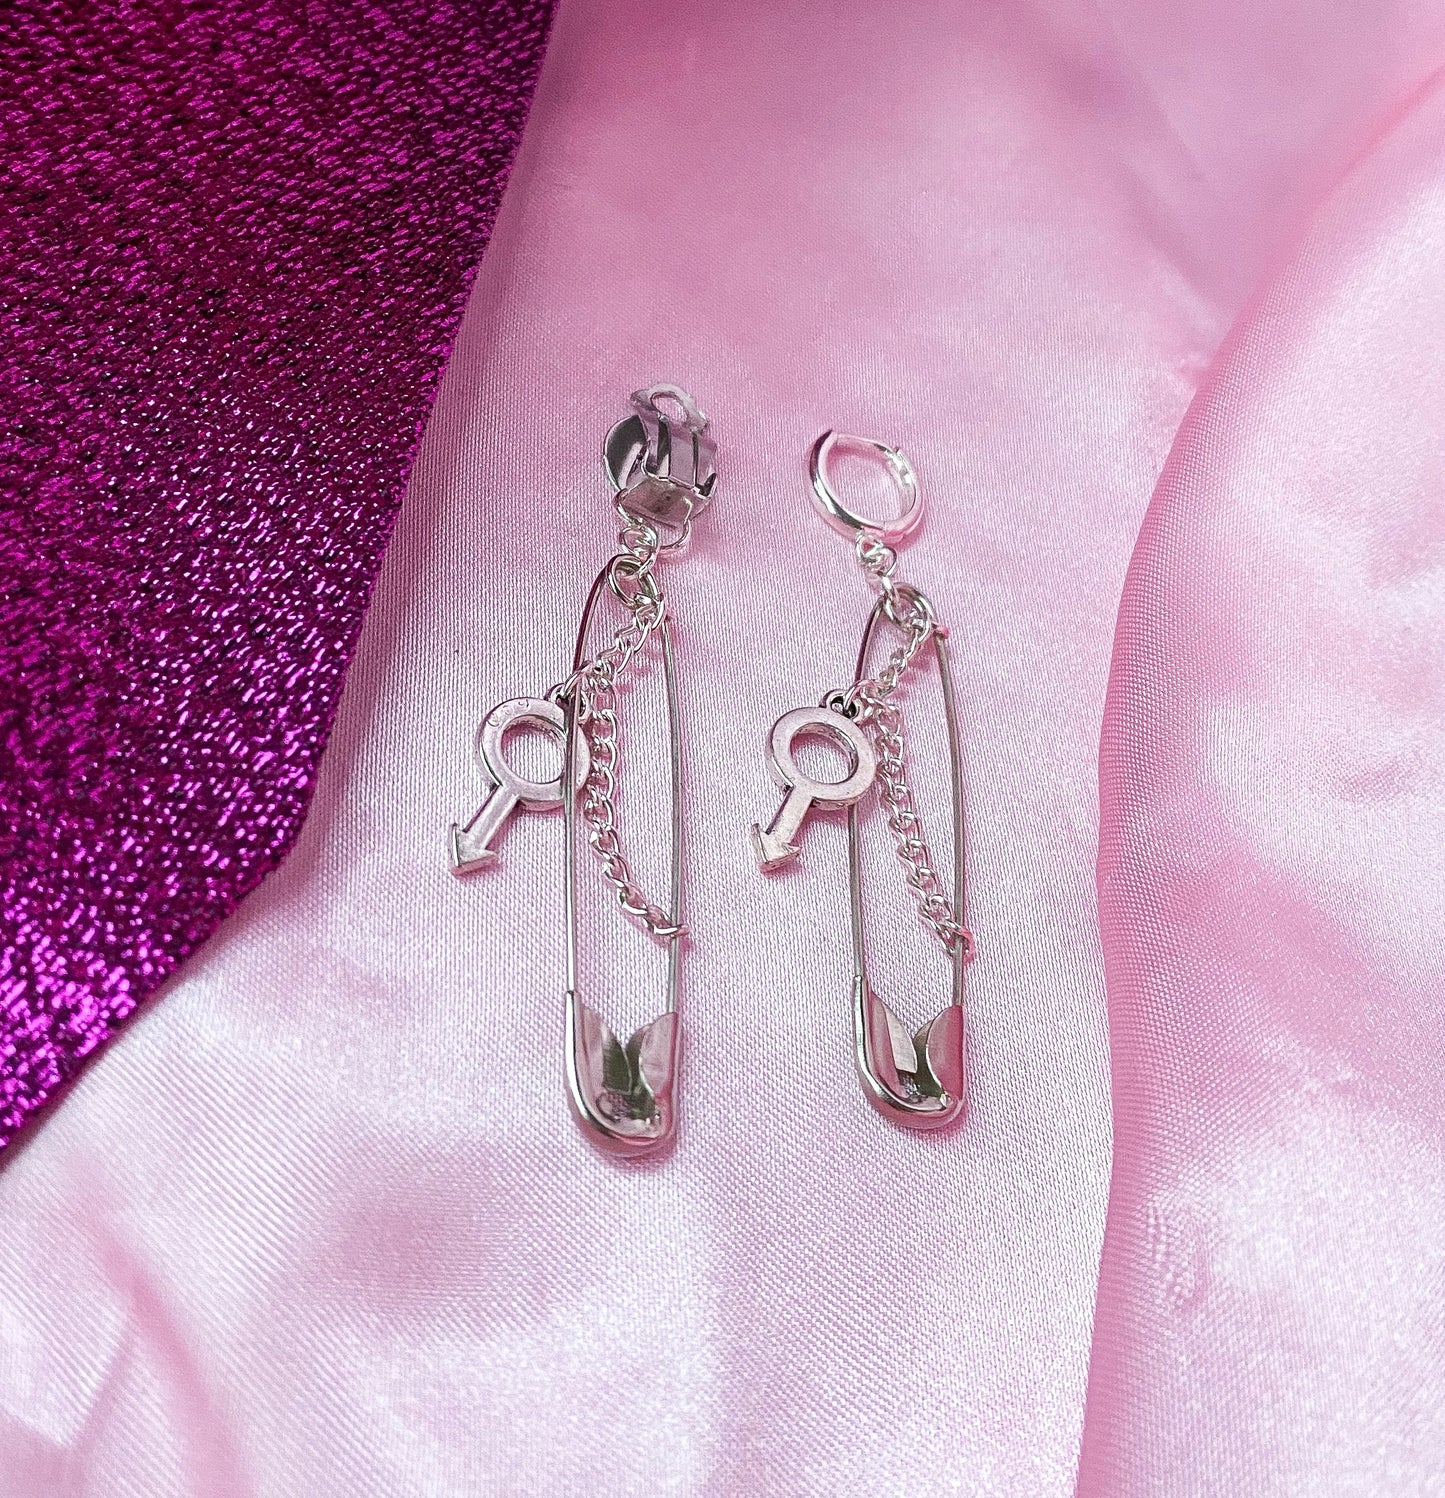 Safety pin earrings with Mars symbol charm